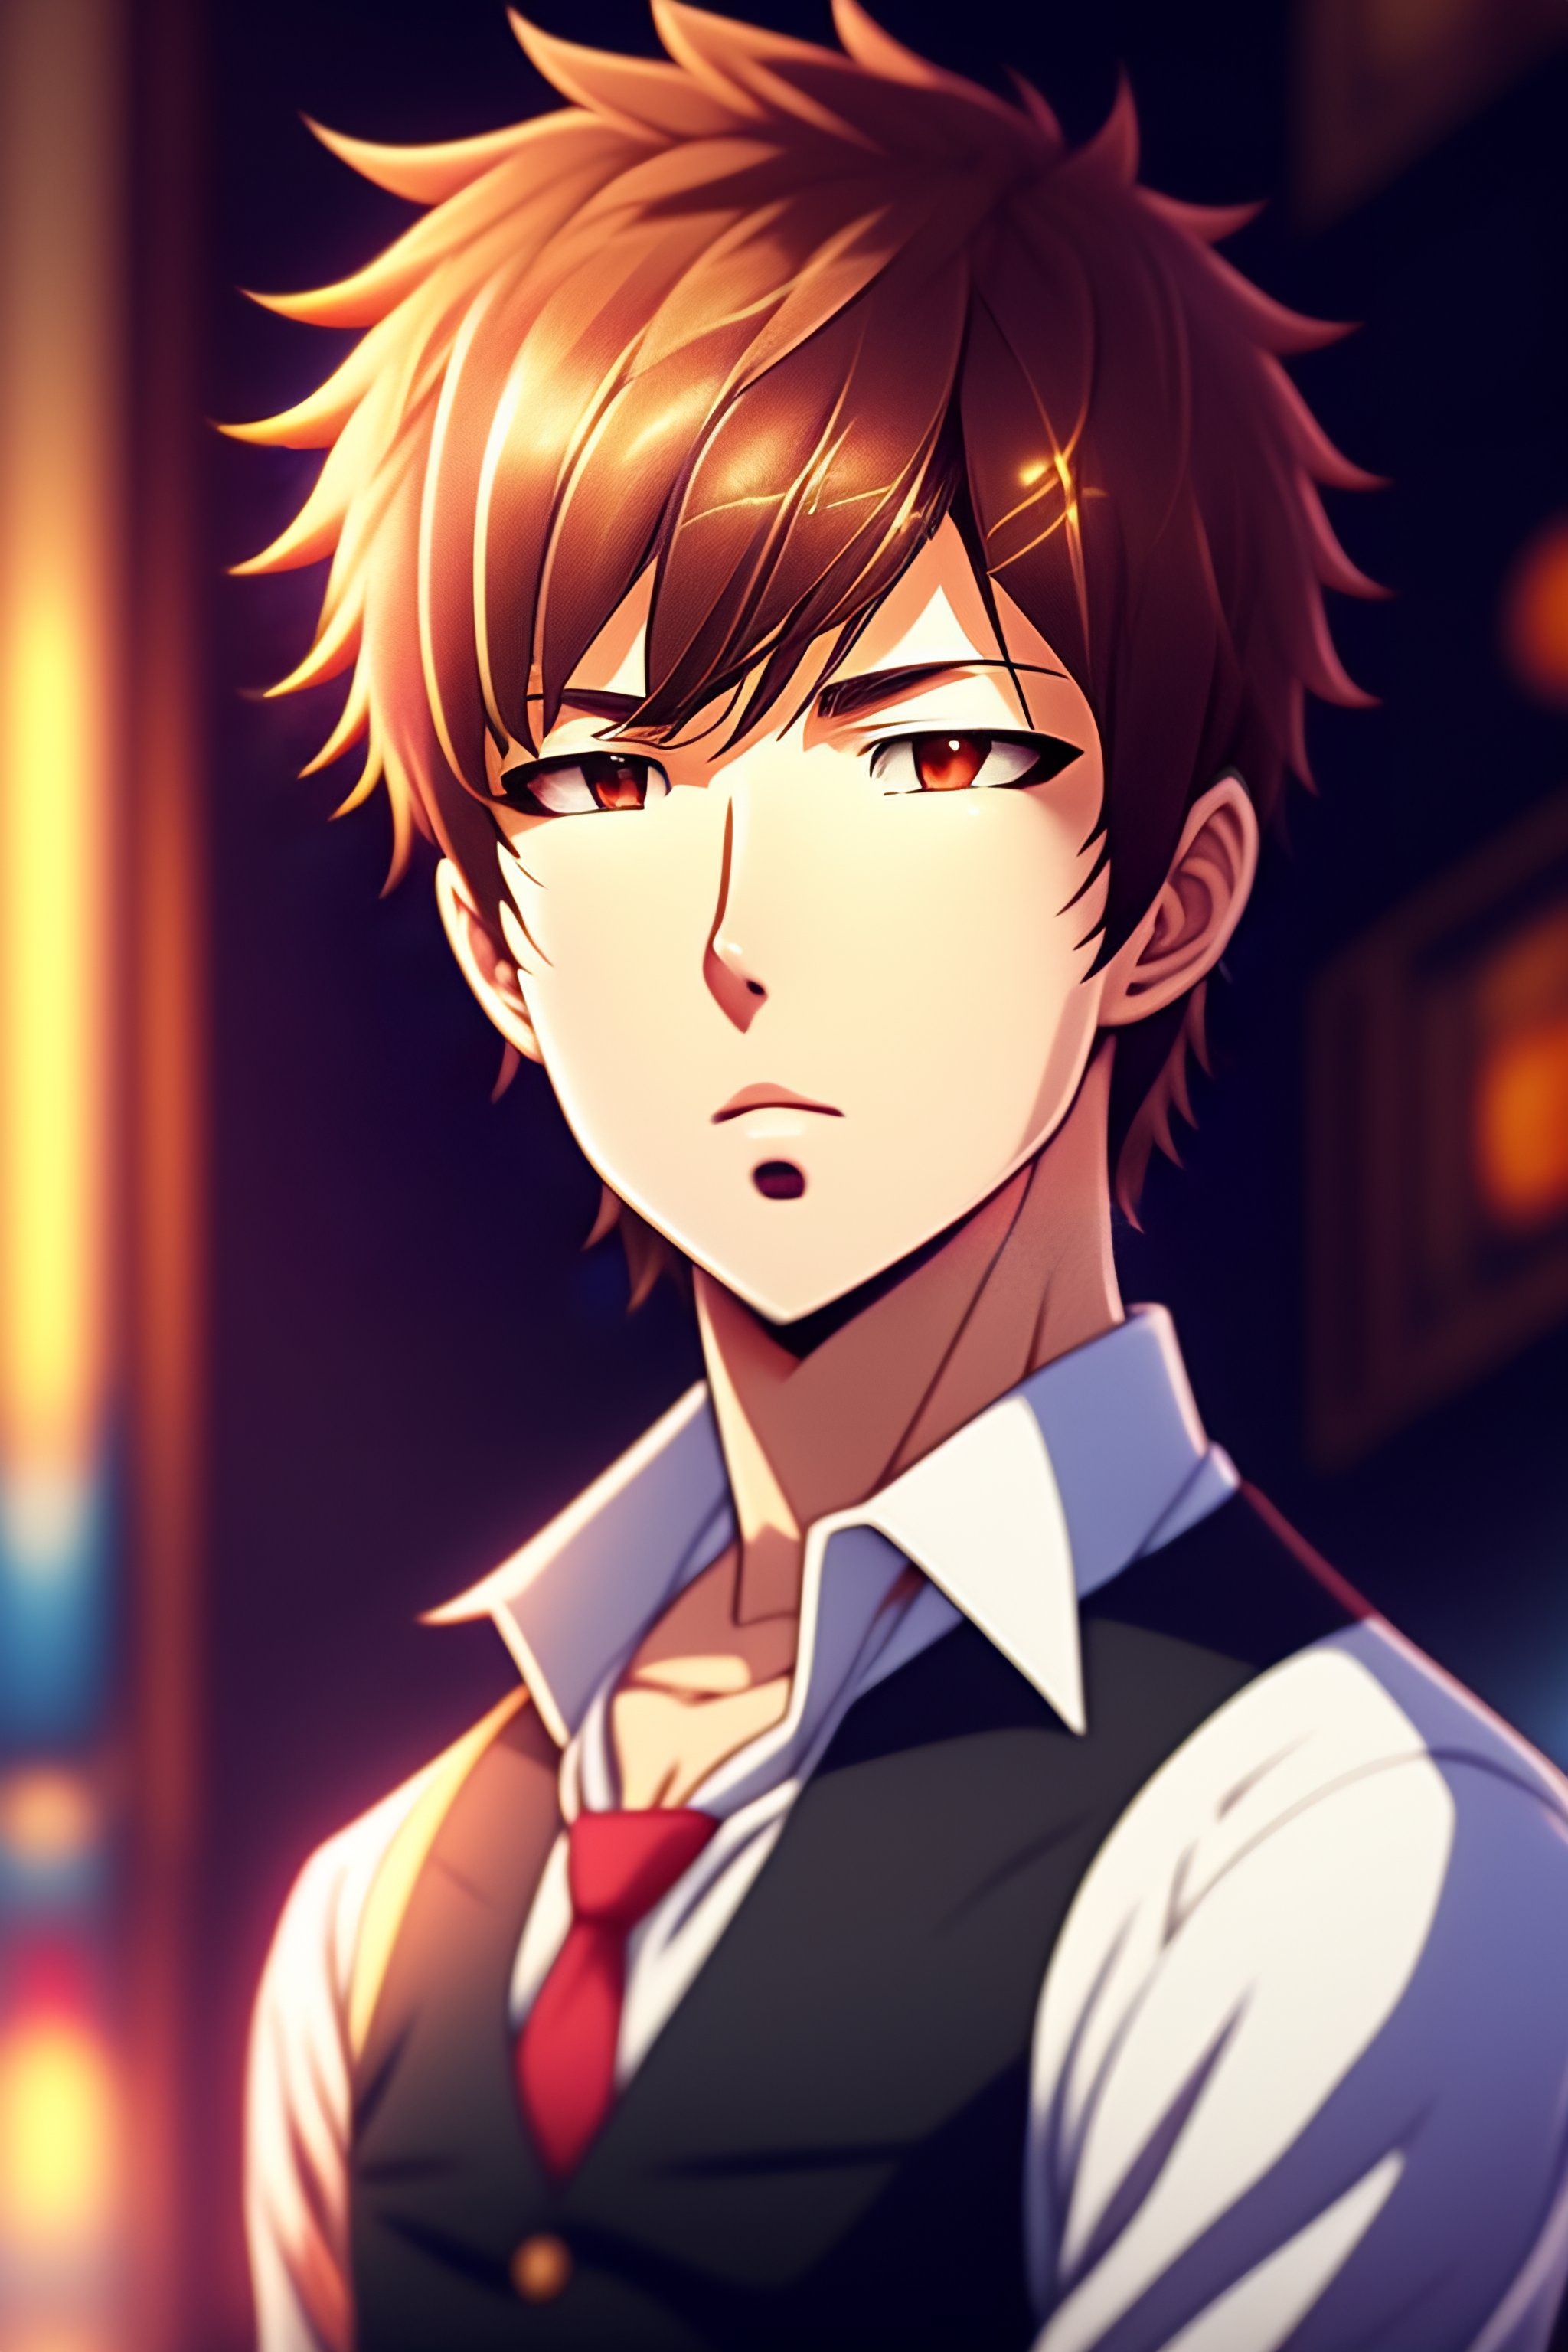 Lexica - Anime, handsome young man